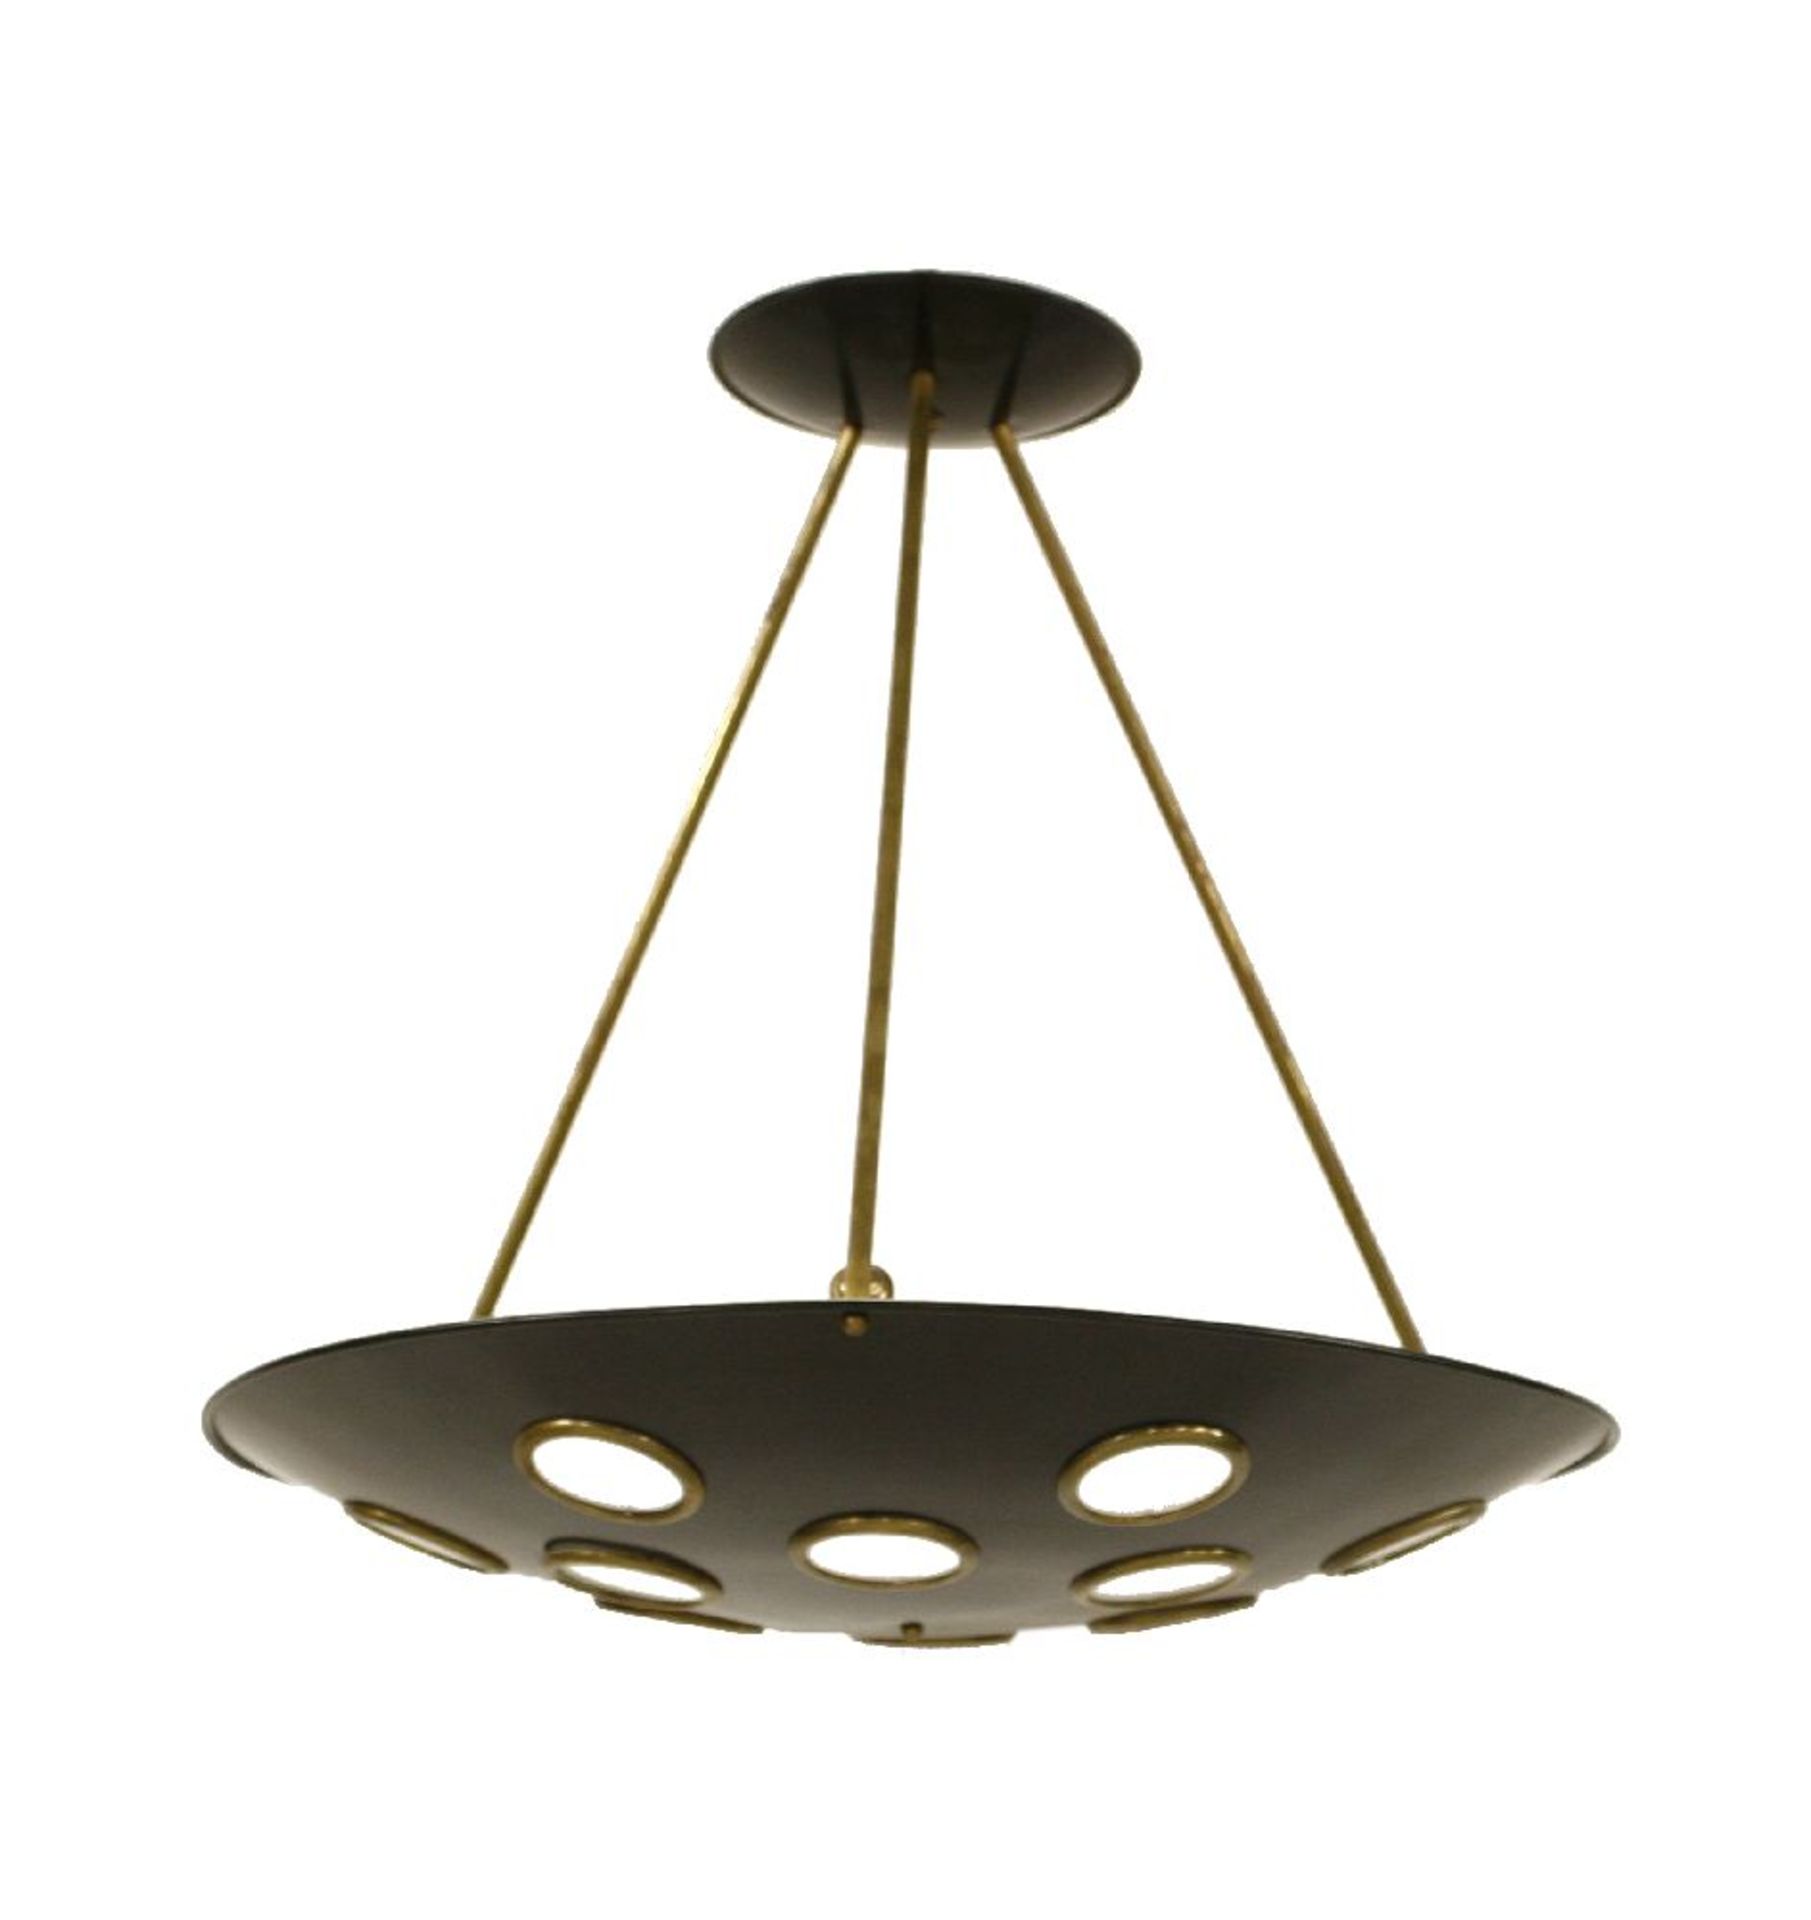 An Italian hanging ceiling light,the shallow dish base with twelve inset glass panels, fitted with